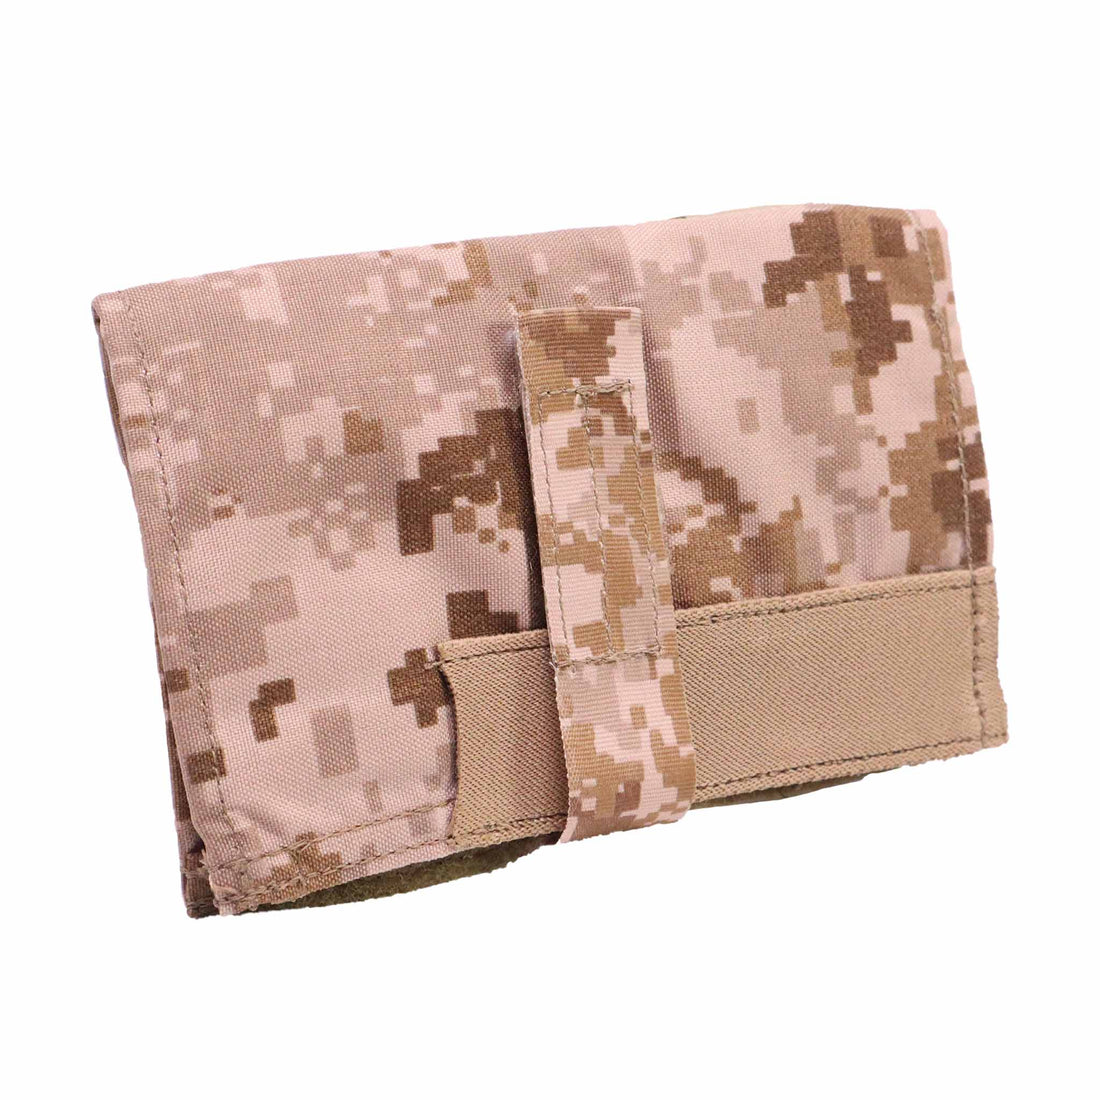 Gear - Pouches - Admin - Eagle Industries SOFLCS Assaulter's Arm Band Sleeve V.2 Maritime - AOR1